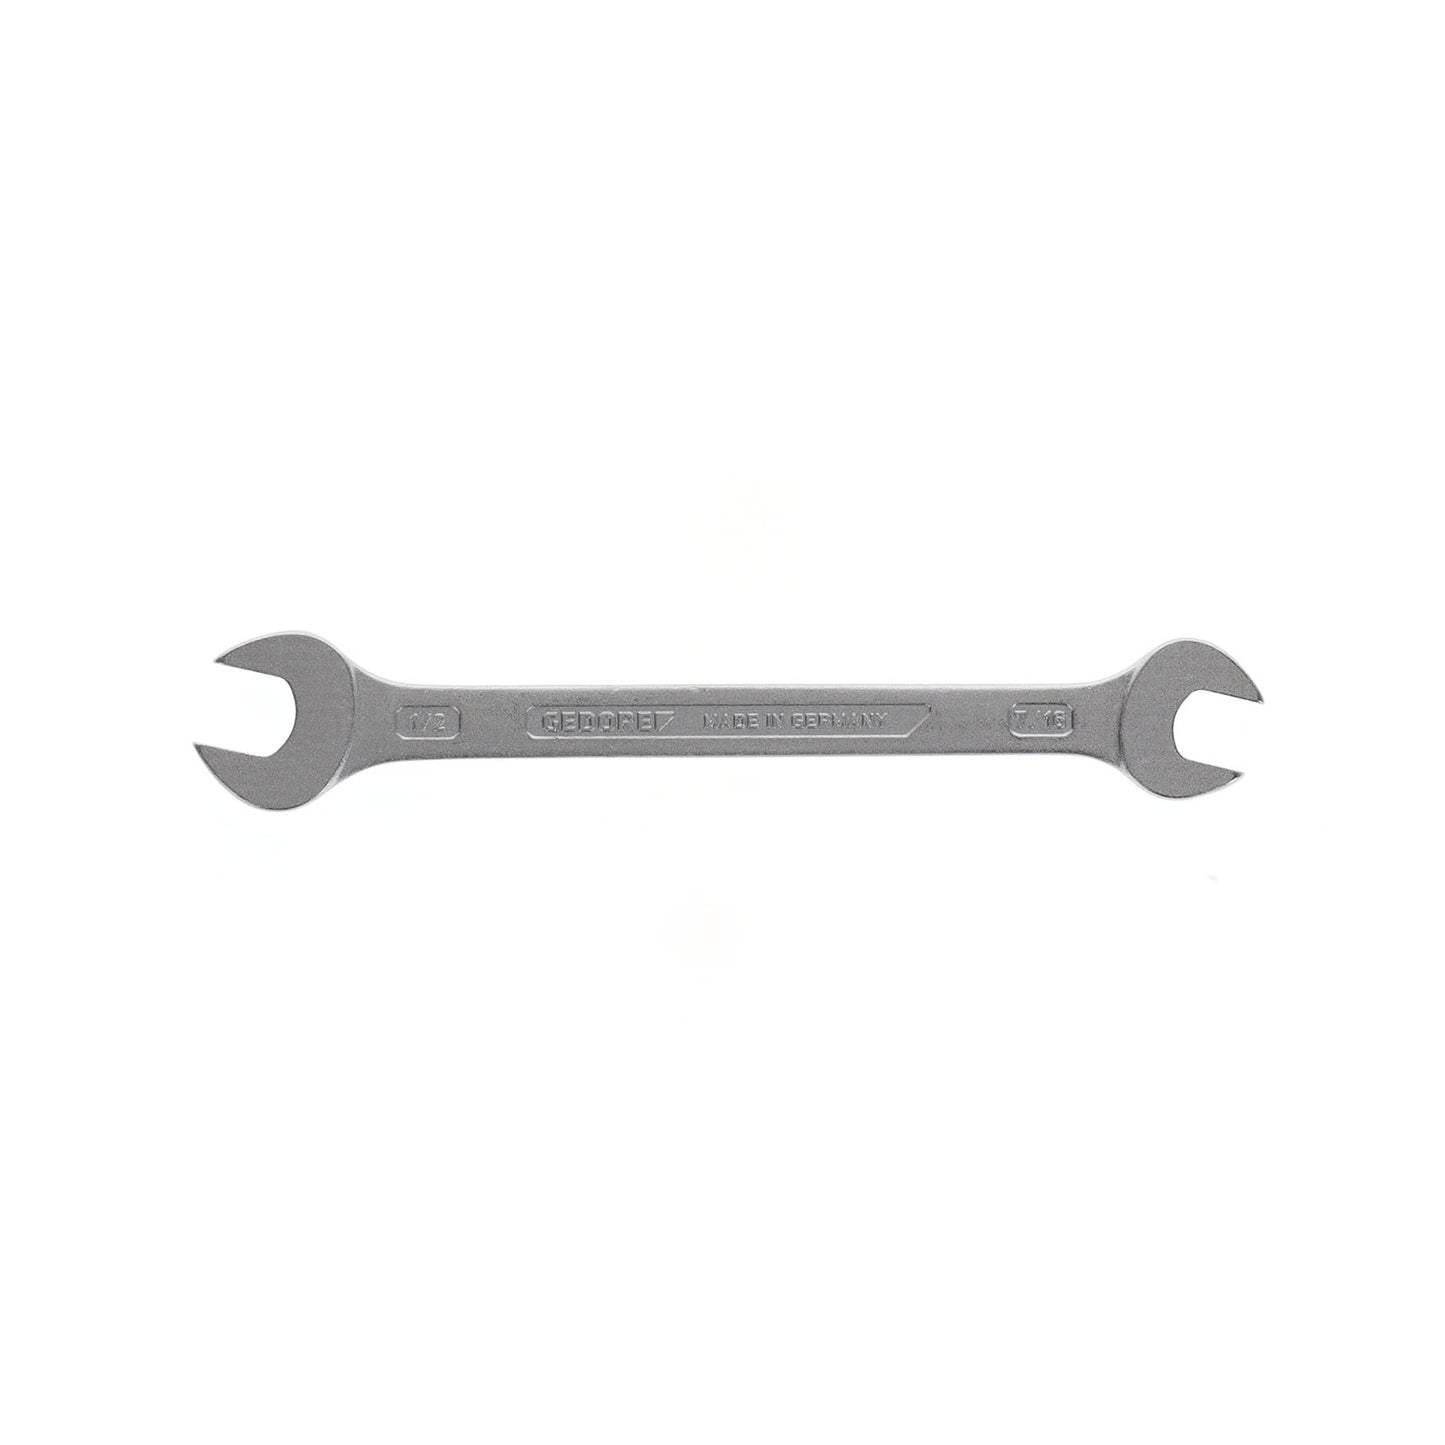 GEDORE 6 7/16X1/2AF - 2-Mount Fixed Wrench, 7/16x1/2AF (6070370)